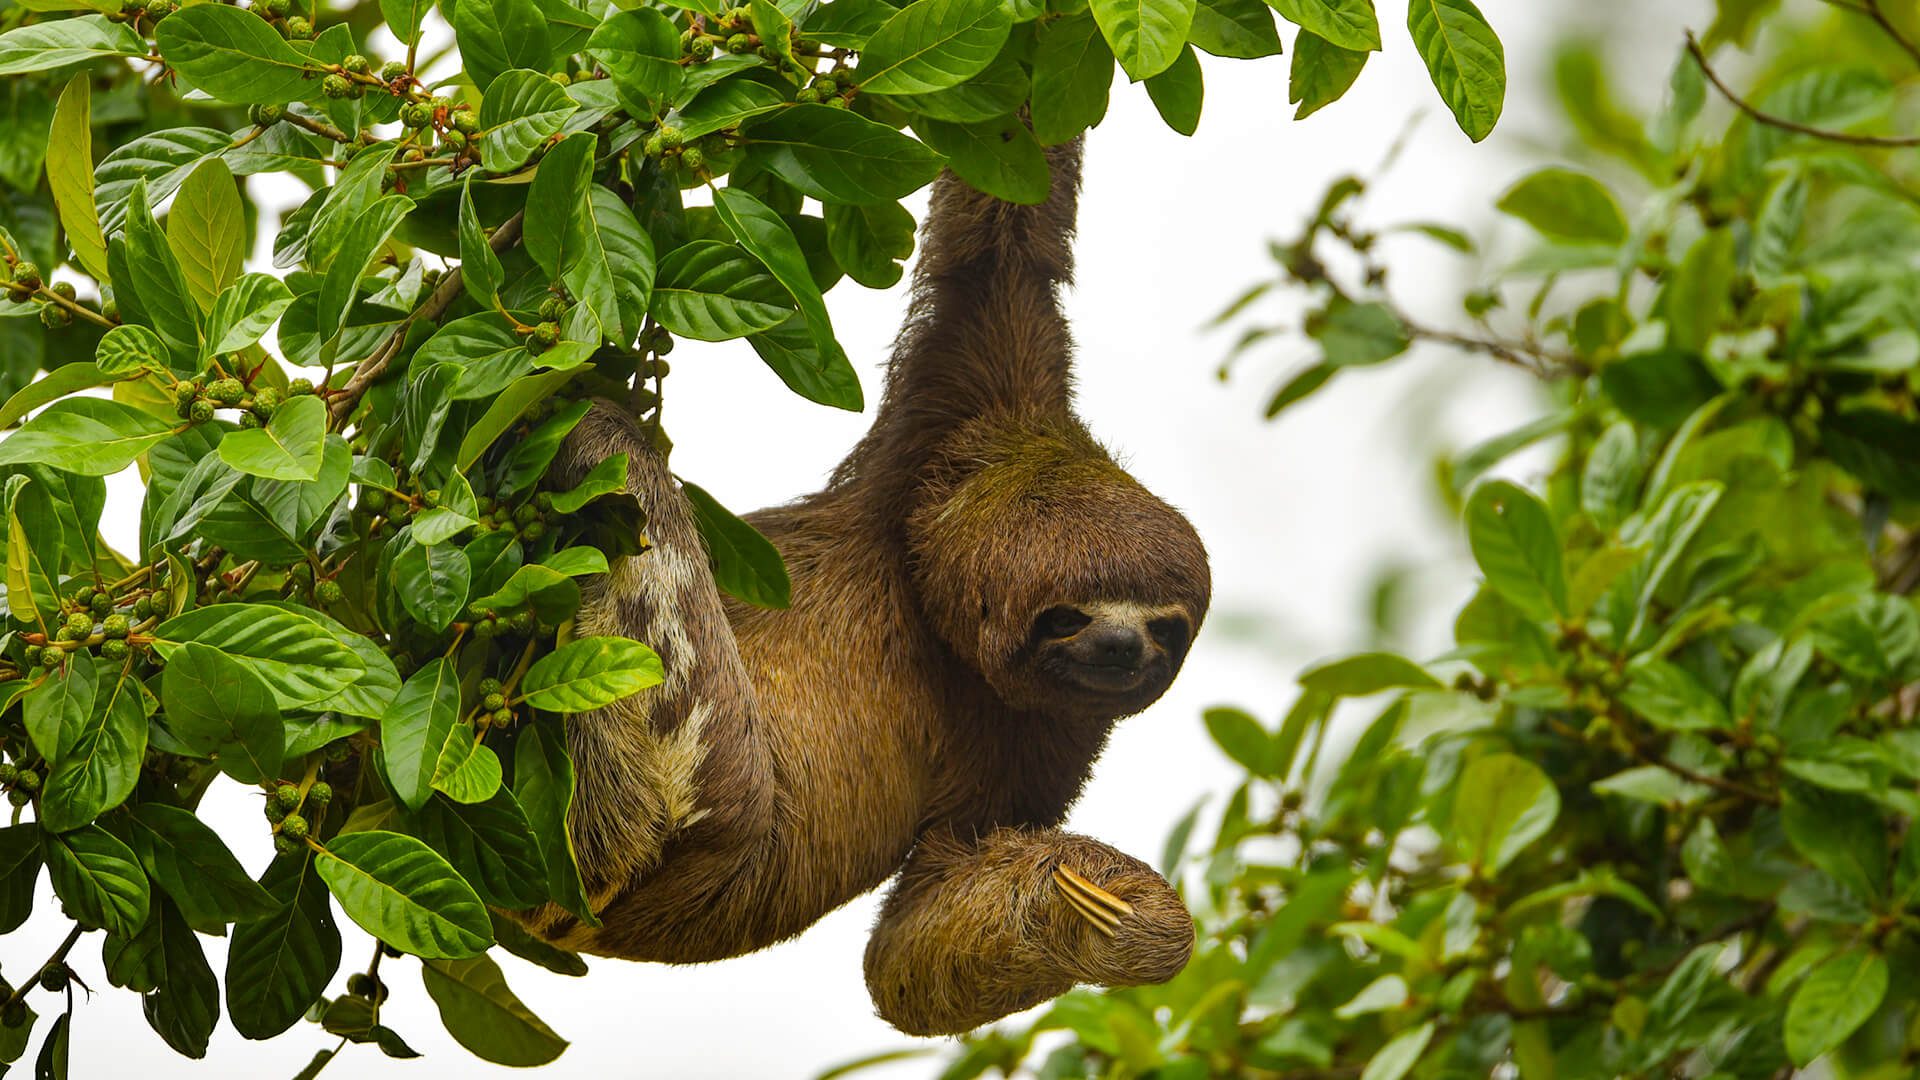 Three-toed sloth hanging from a fruiting tree branch